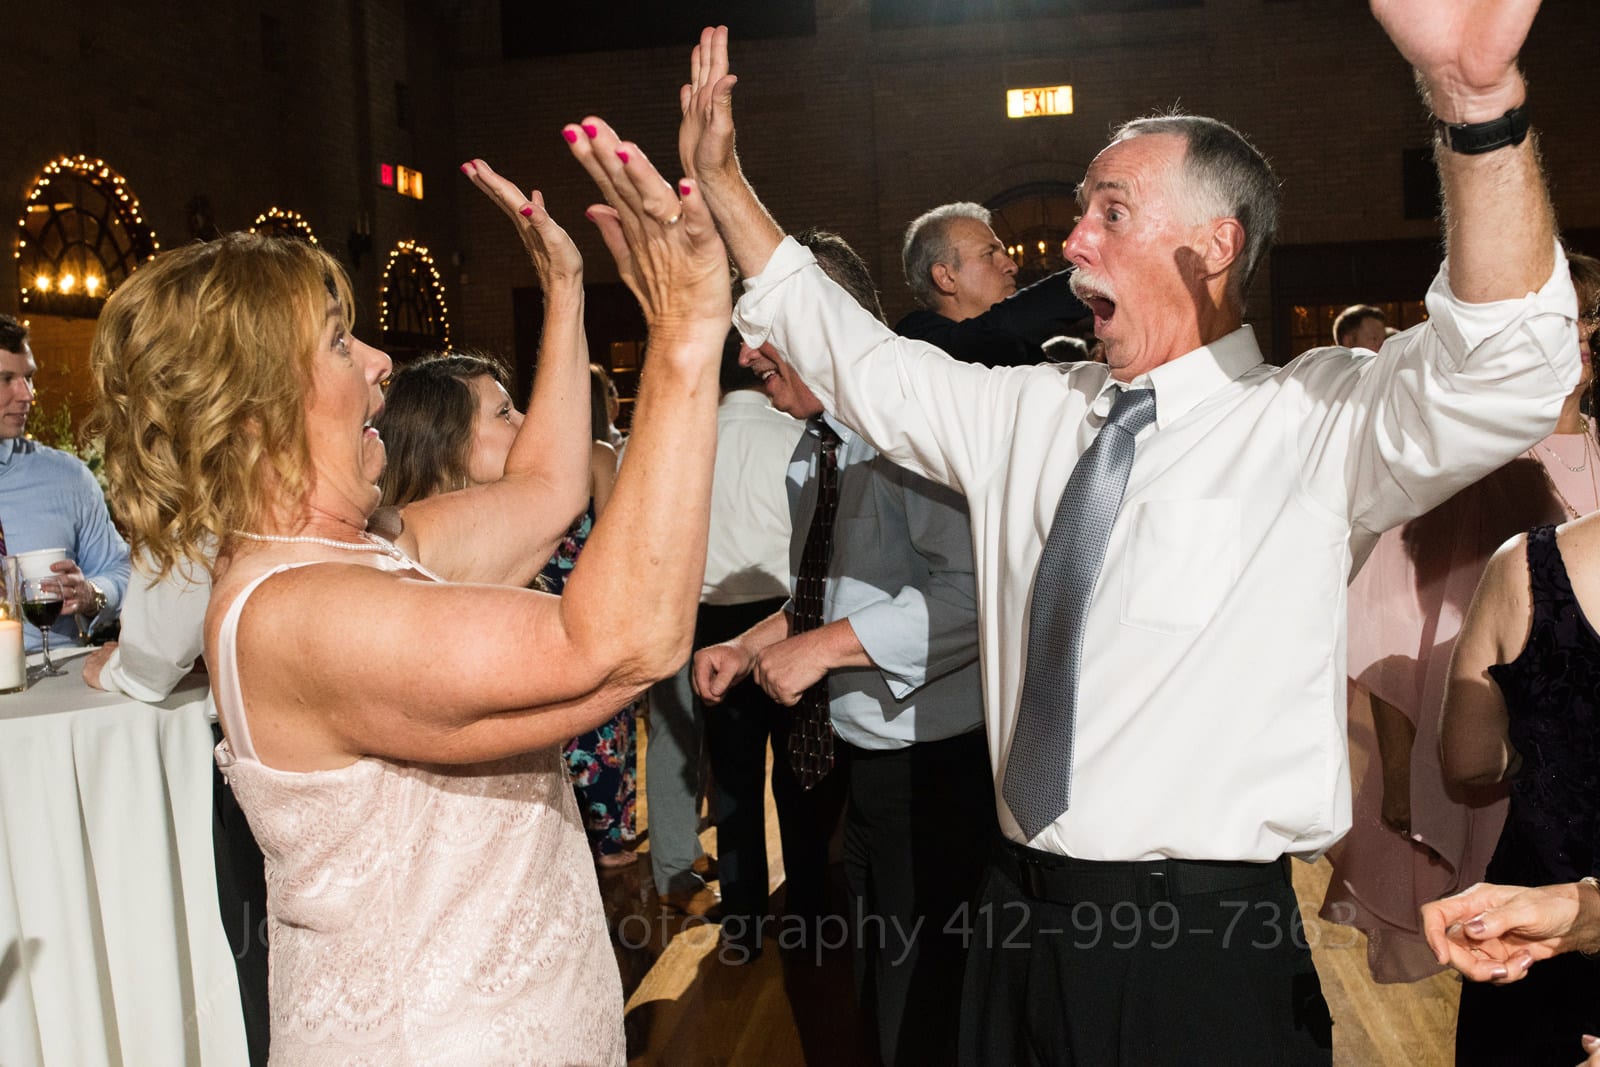 An older man and woman hold their hands in the air and make funny faces at each other while they dance during a St Francis Hall Washington DC wedding.